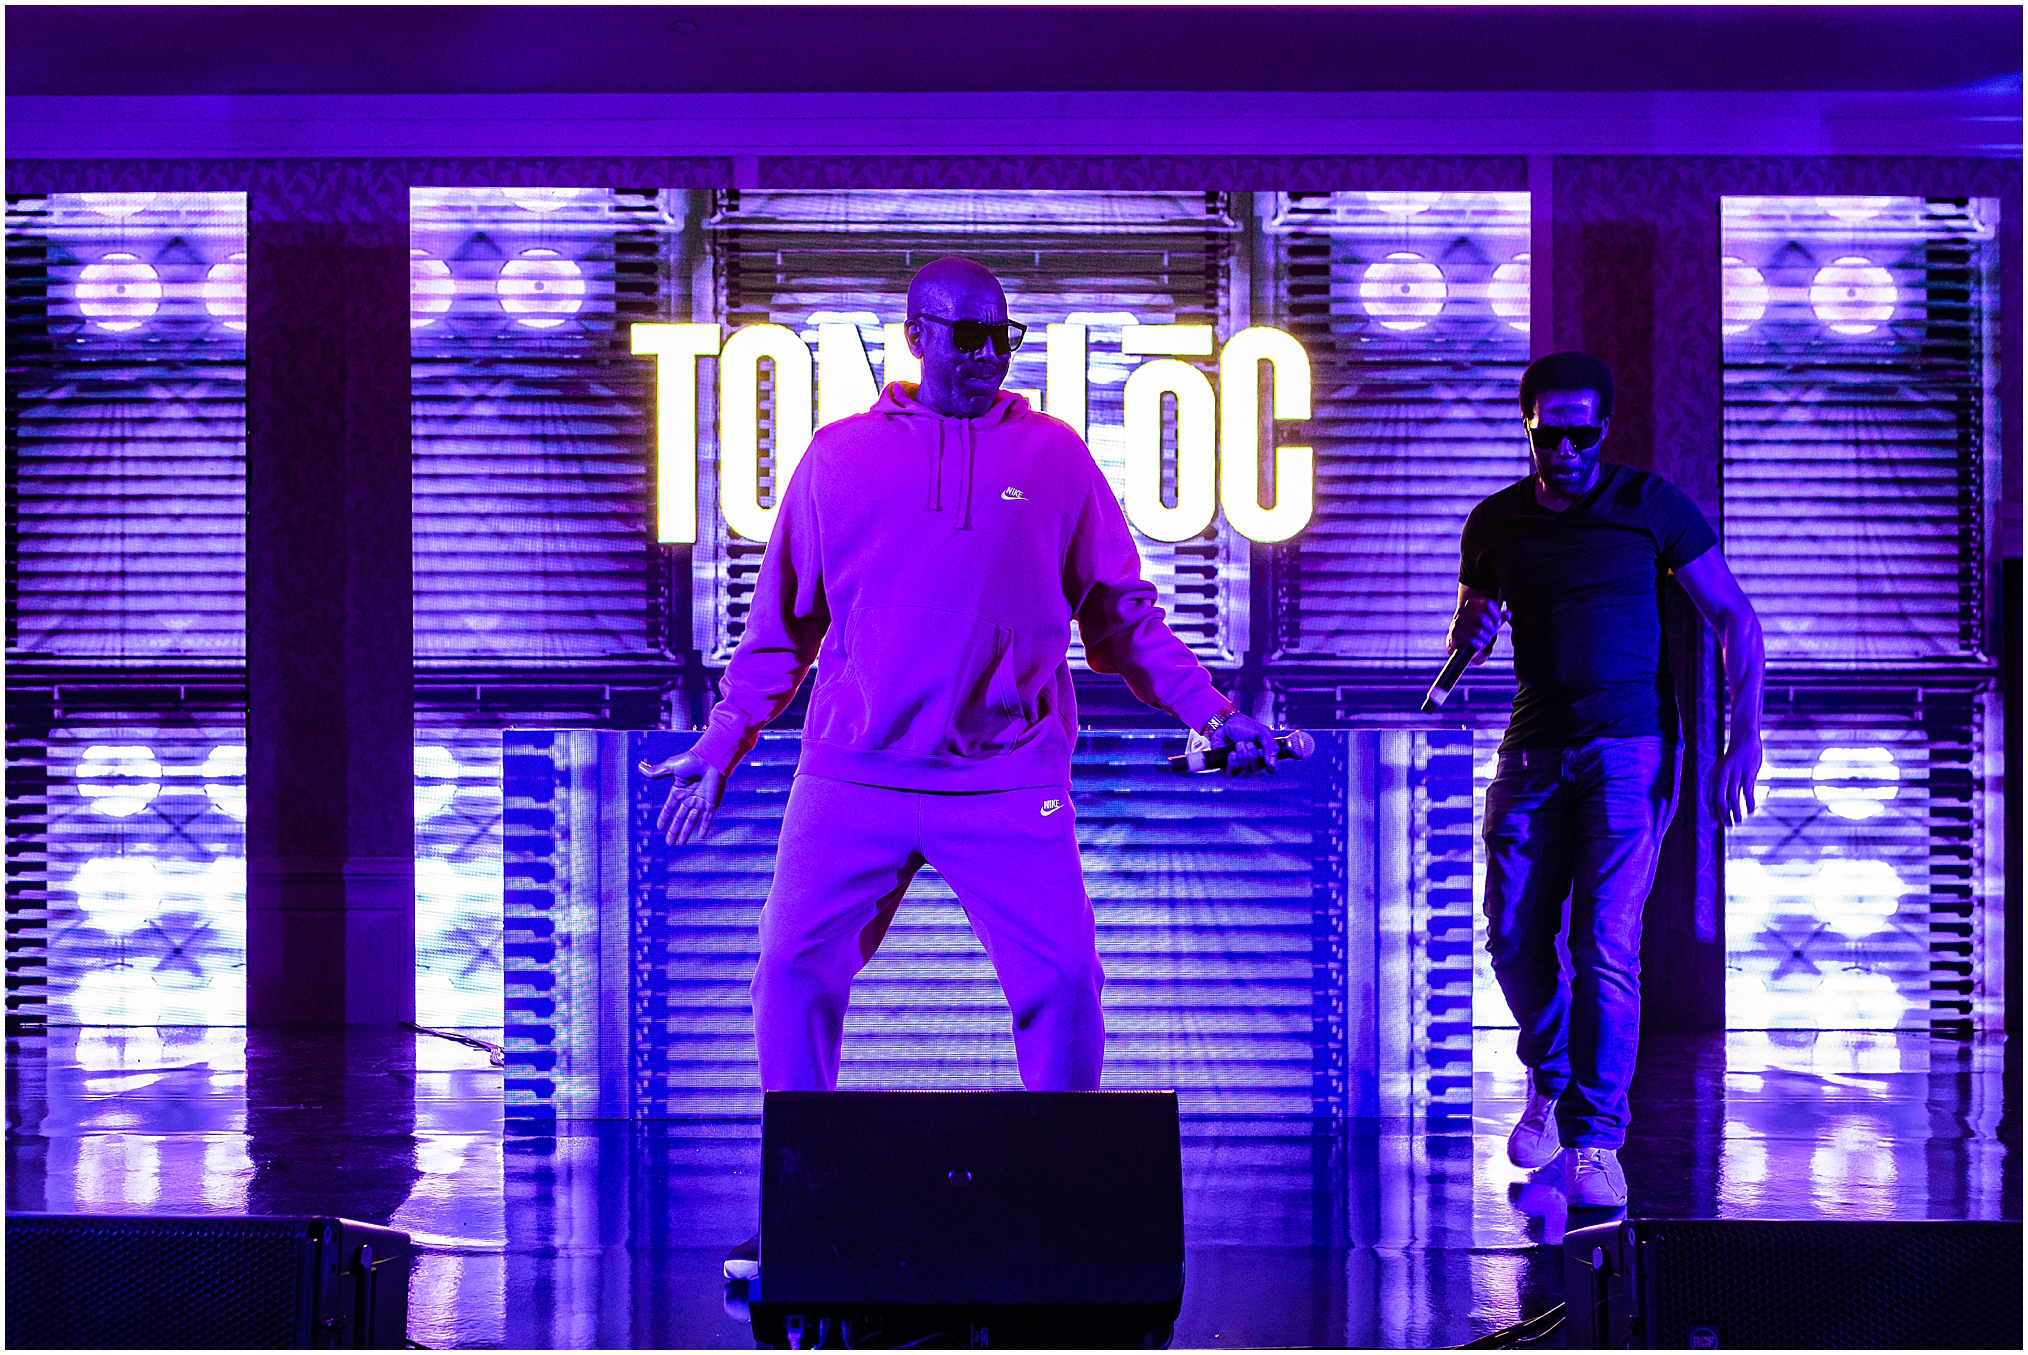 Tone Lōc with Turbo B for private event.